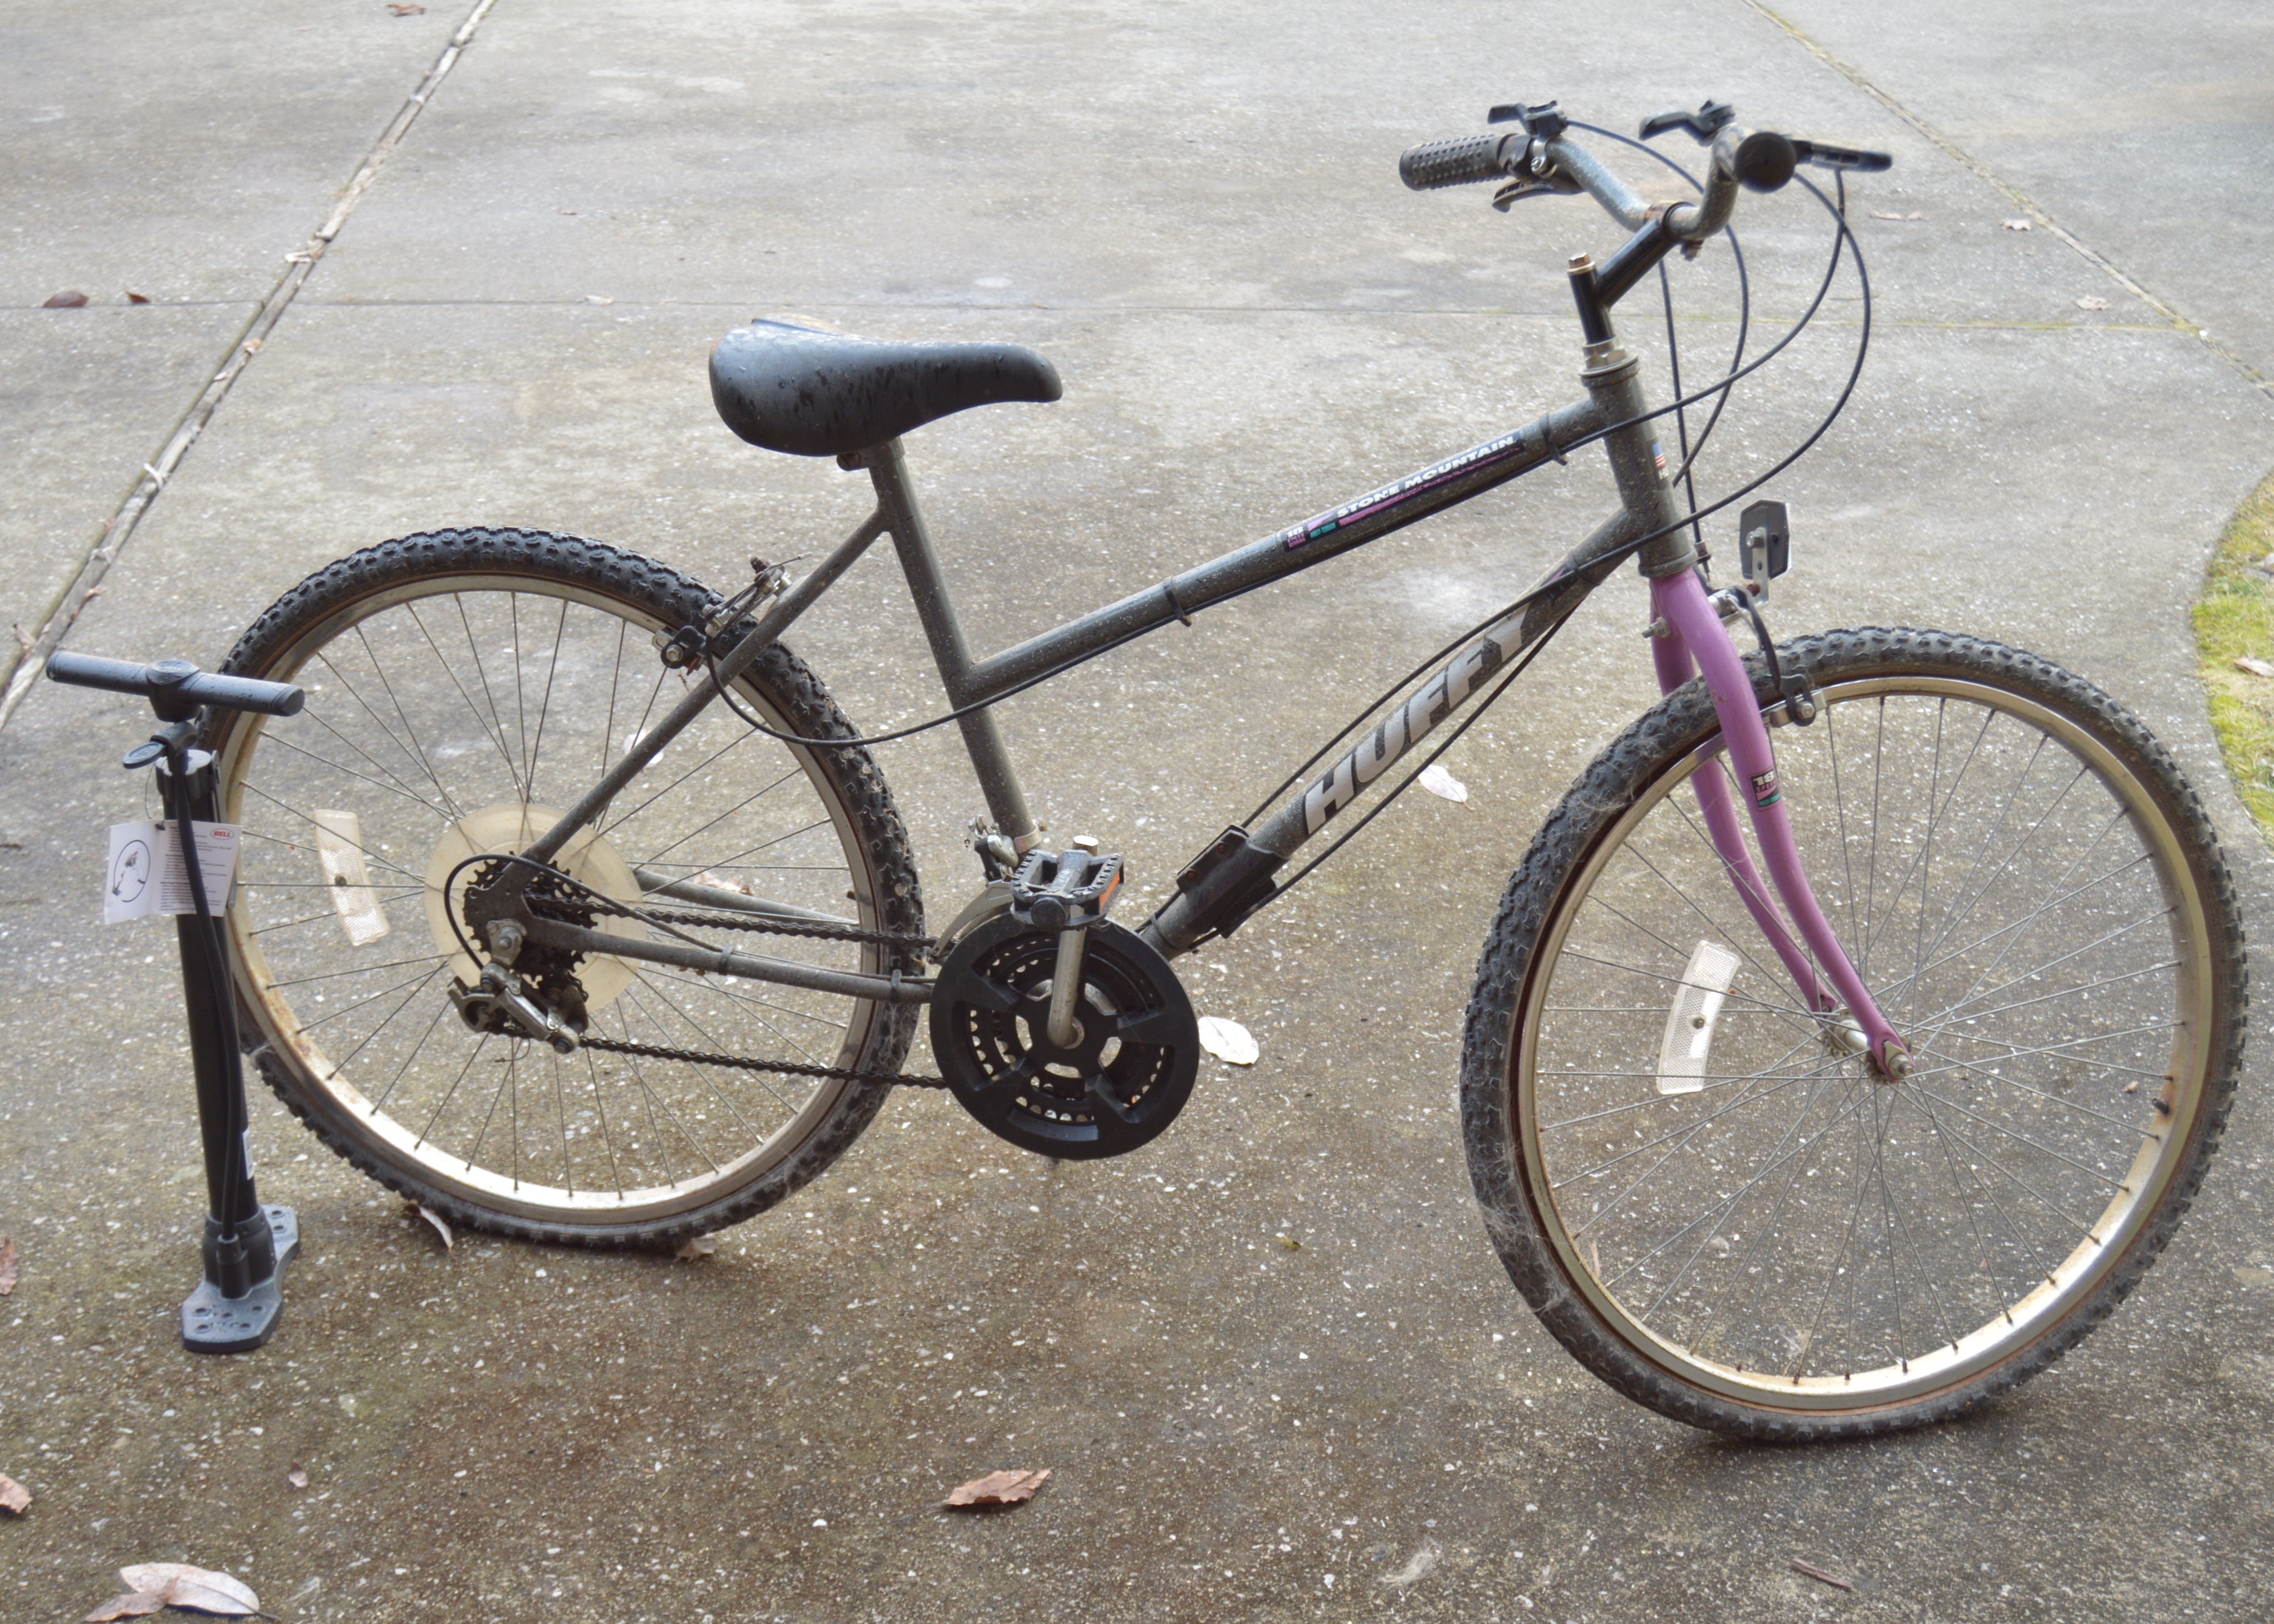 huffy stone mountain 18 speed bike for sale